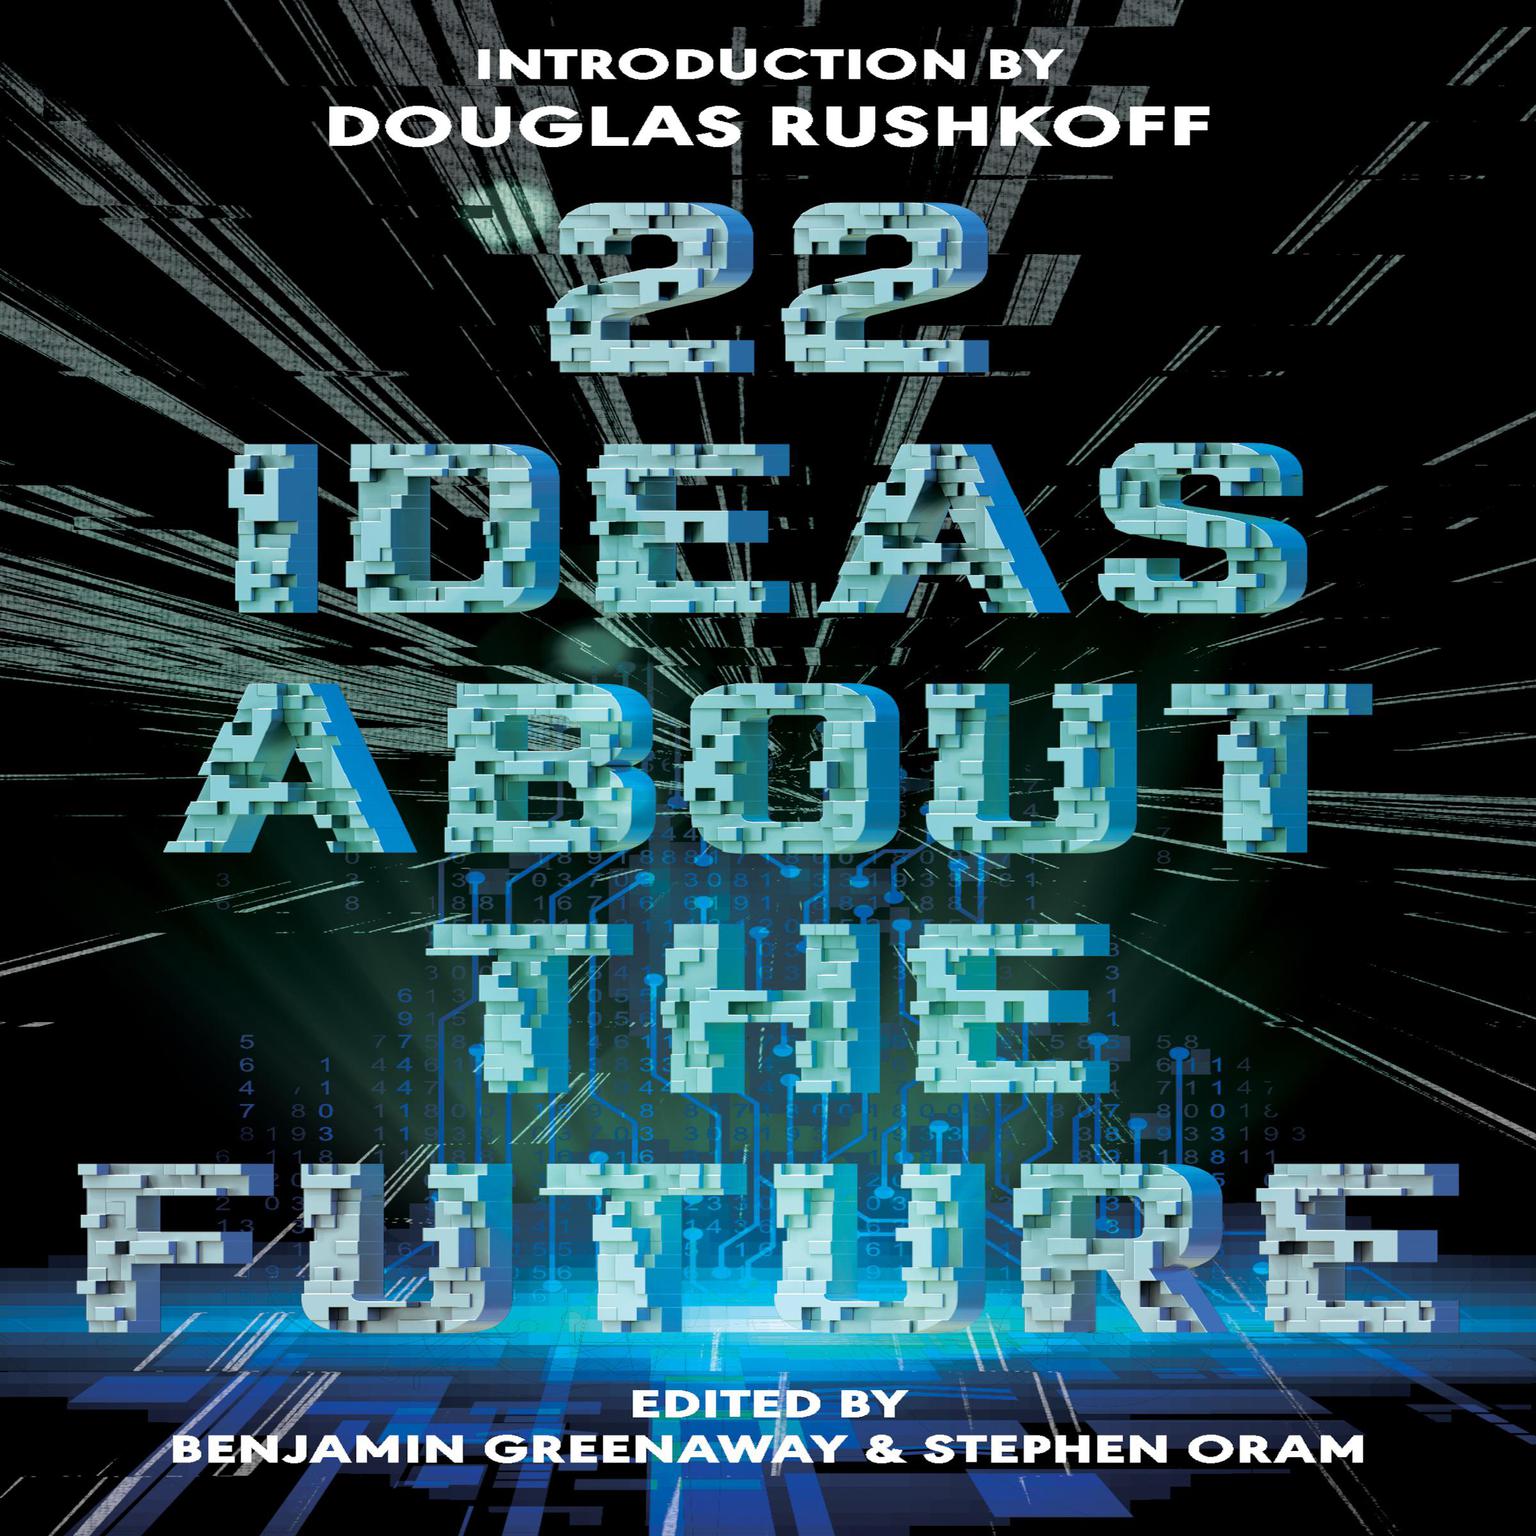 22 Ideas About The Future Audiobook, by Benjamin Greenaway